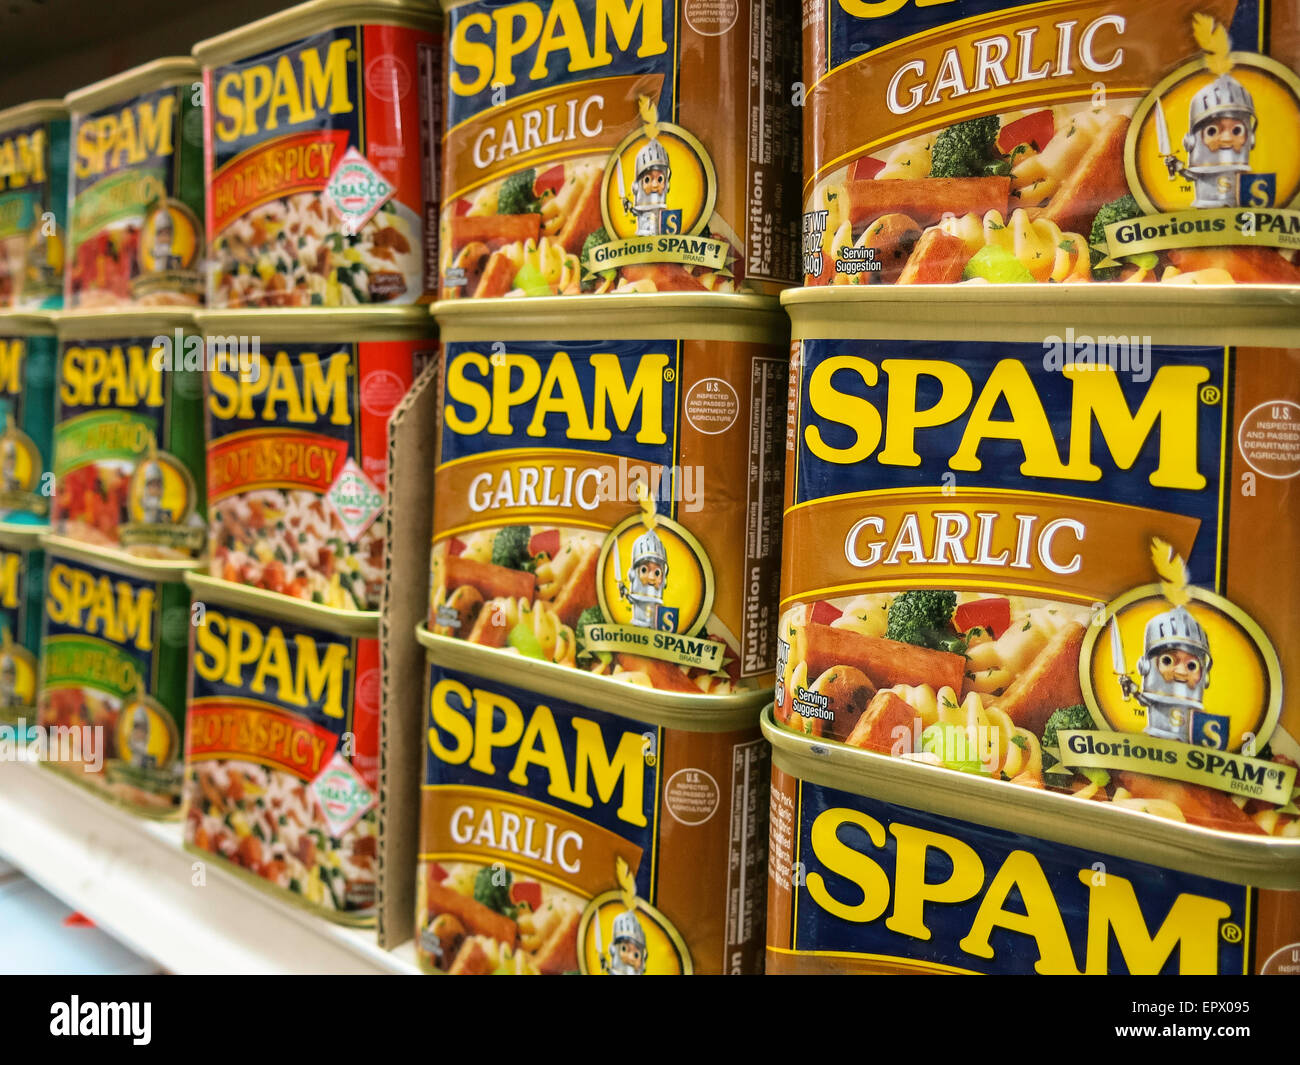 https://c8.alamy.com/comp/EPX095/grocery-store-luncheon-loaf-spam-tins-chinatown-nyc-usa-EPX095.jpg